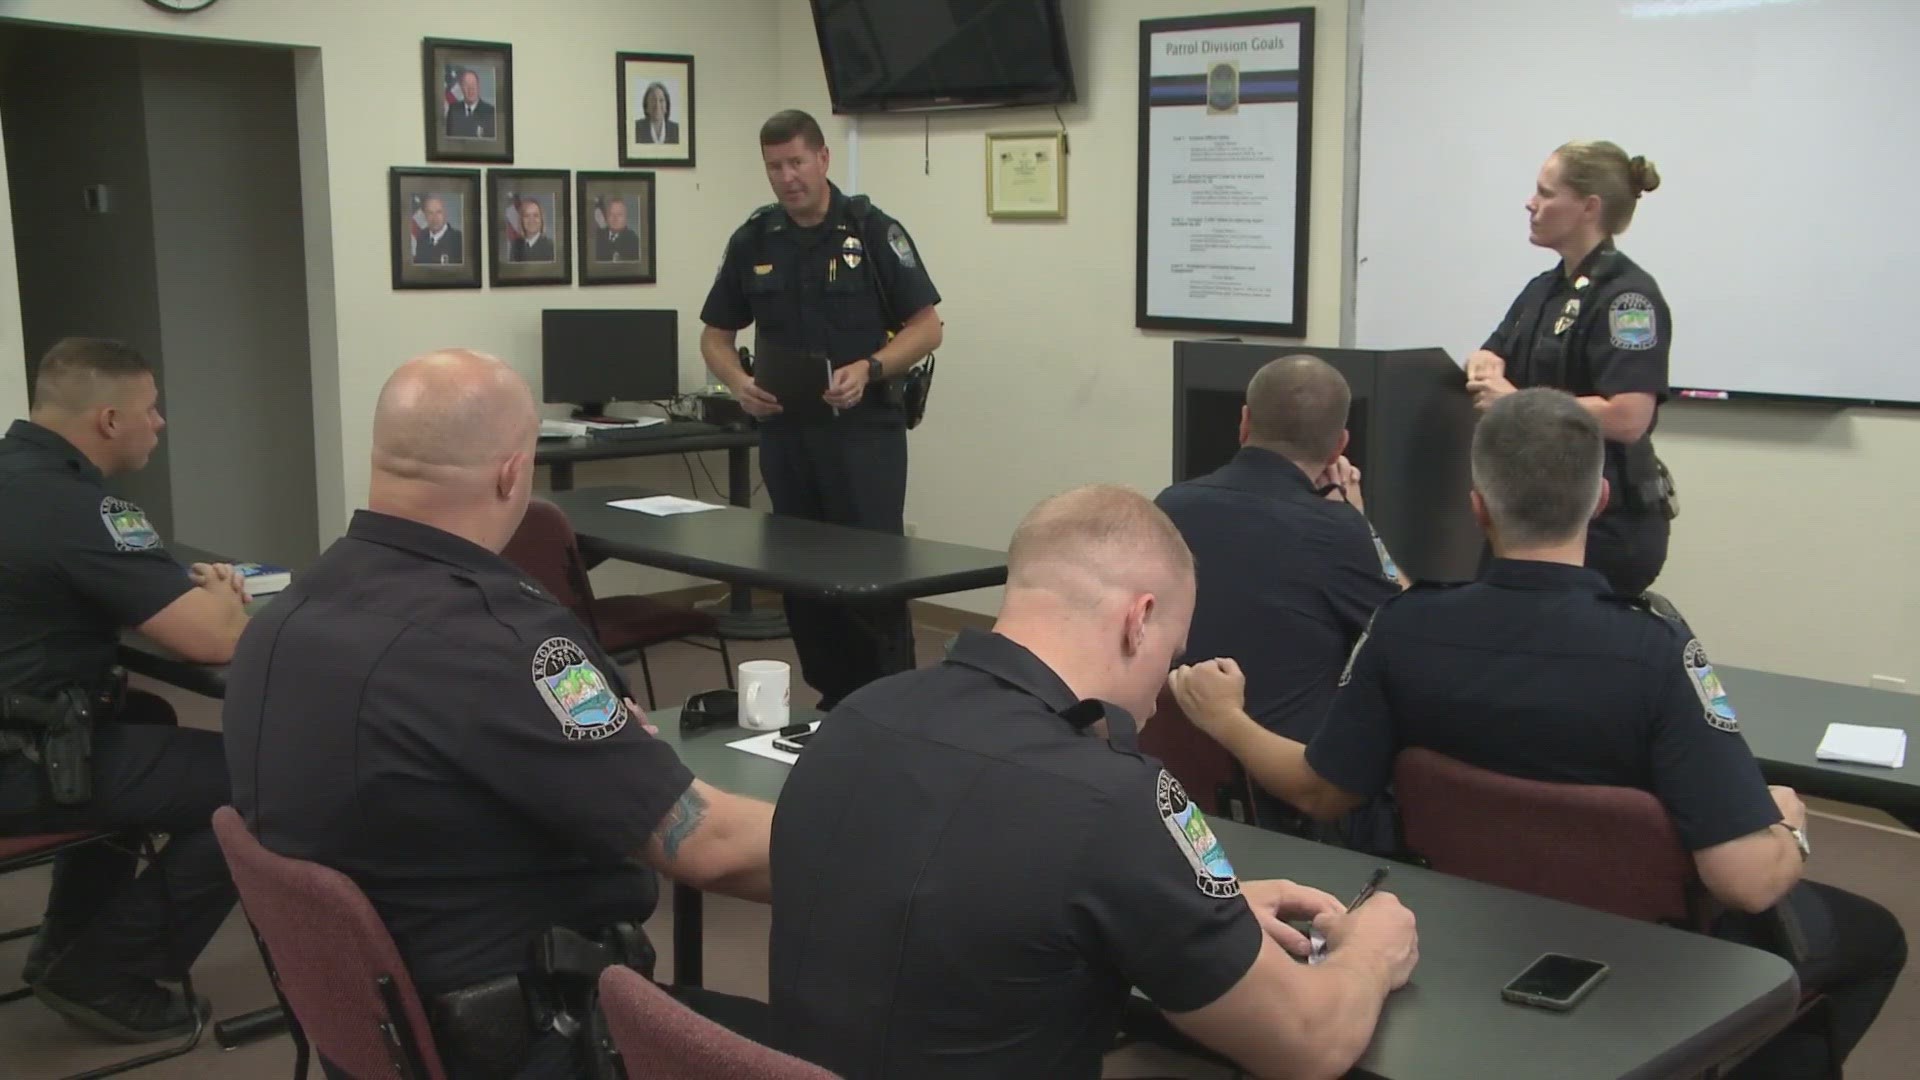 The Police Advisory and Review Committee is a group of citizens who meet with Knoxville Police to discuss the department's policies and discipline processes.